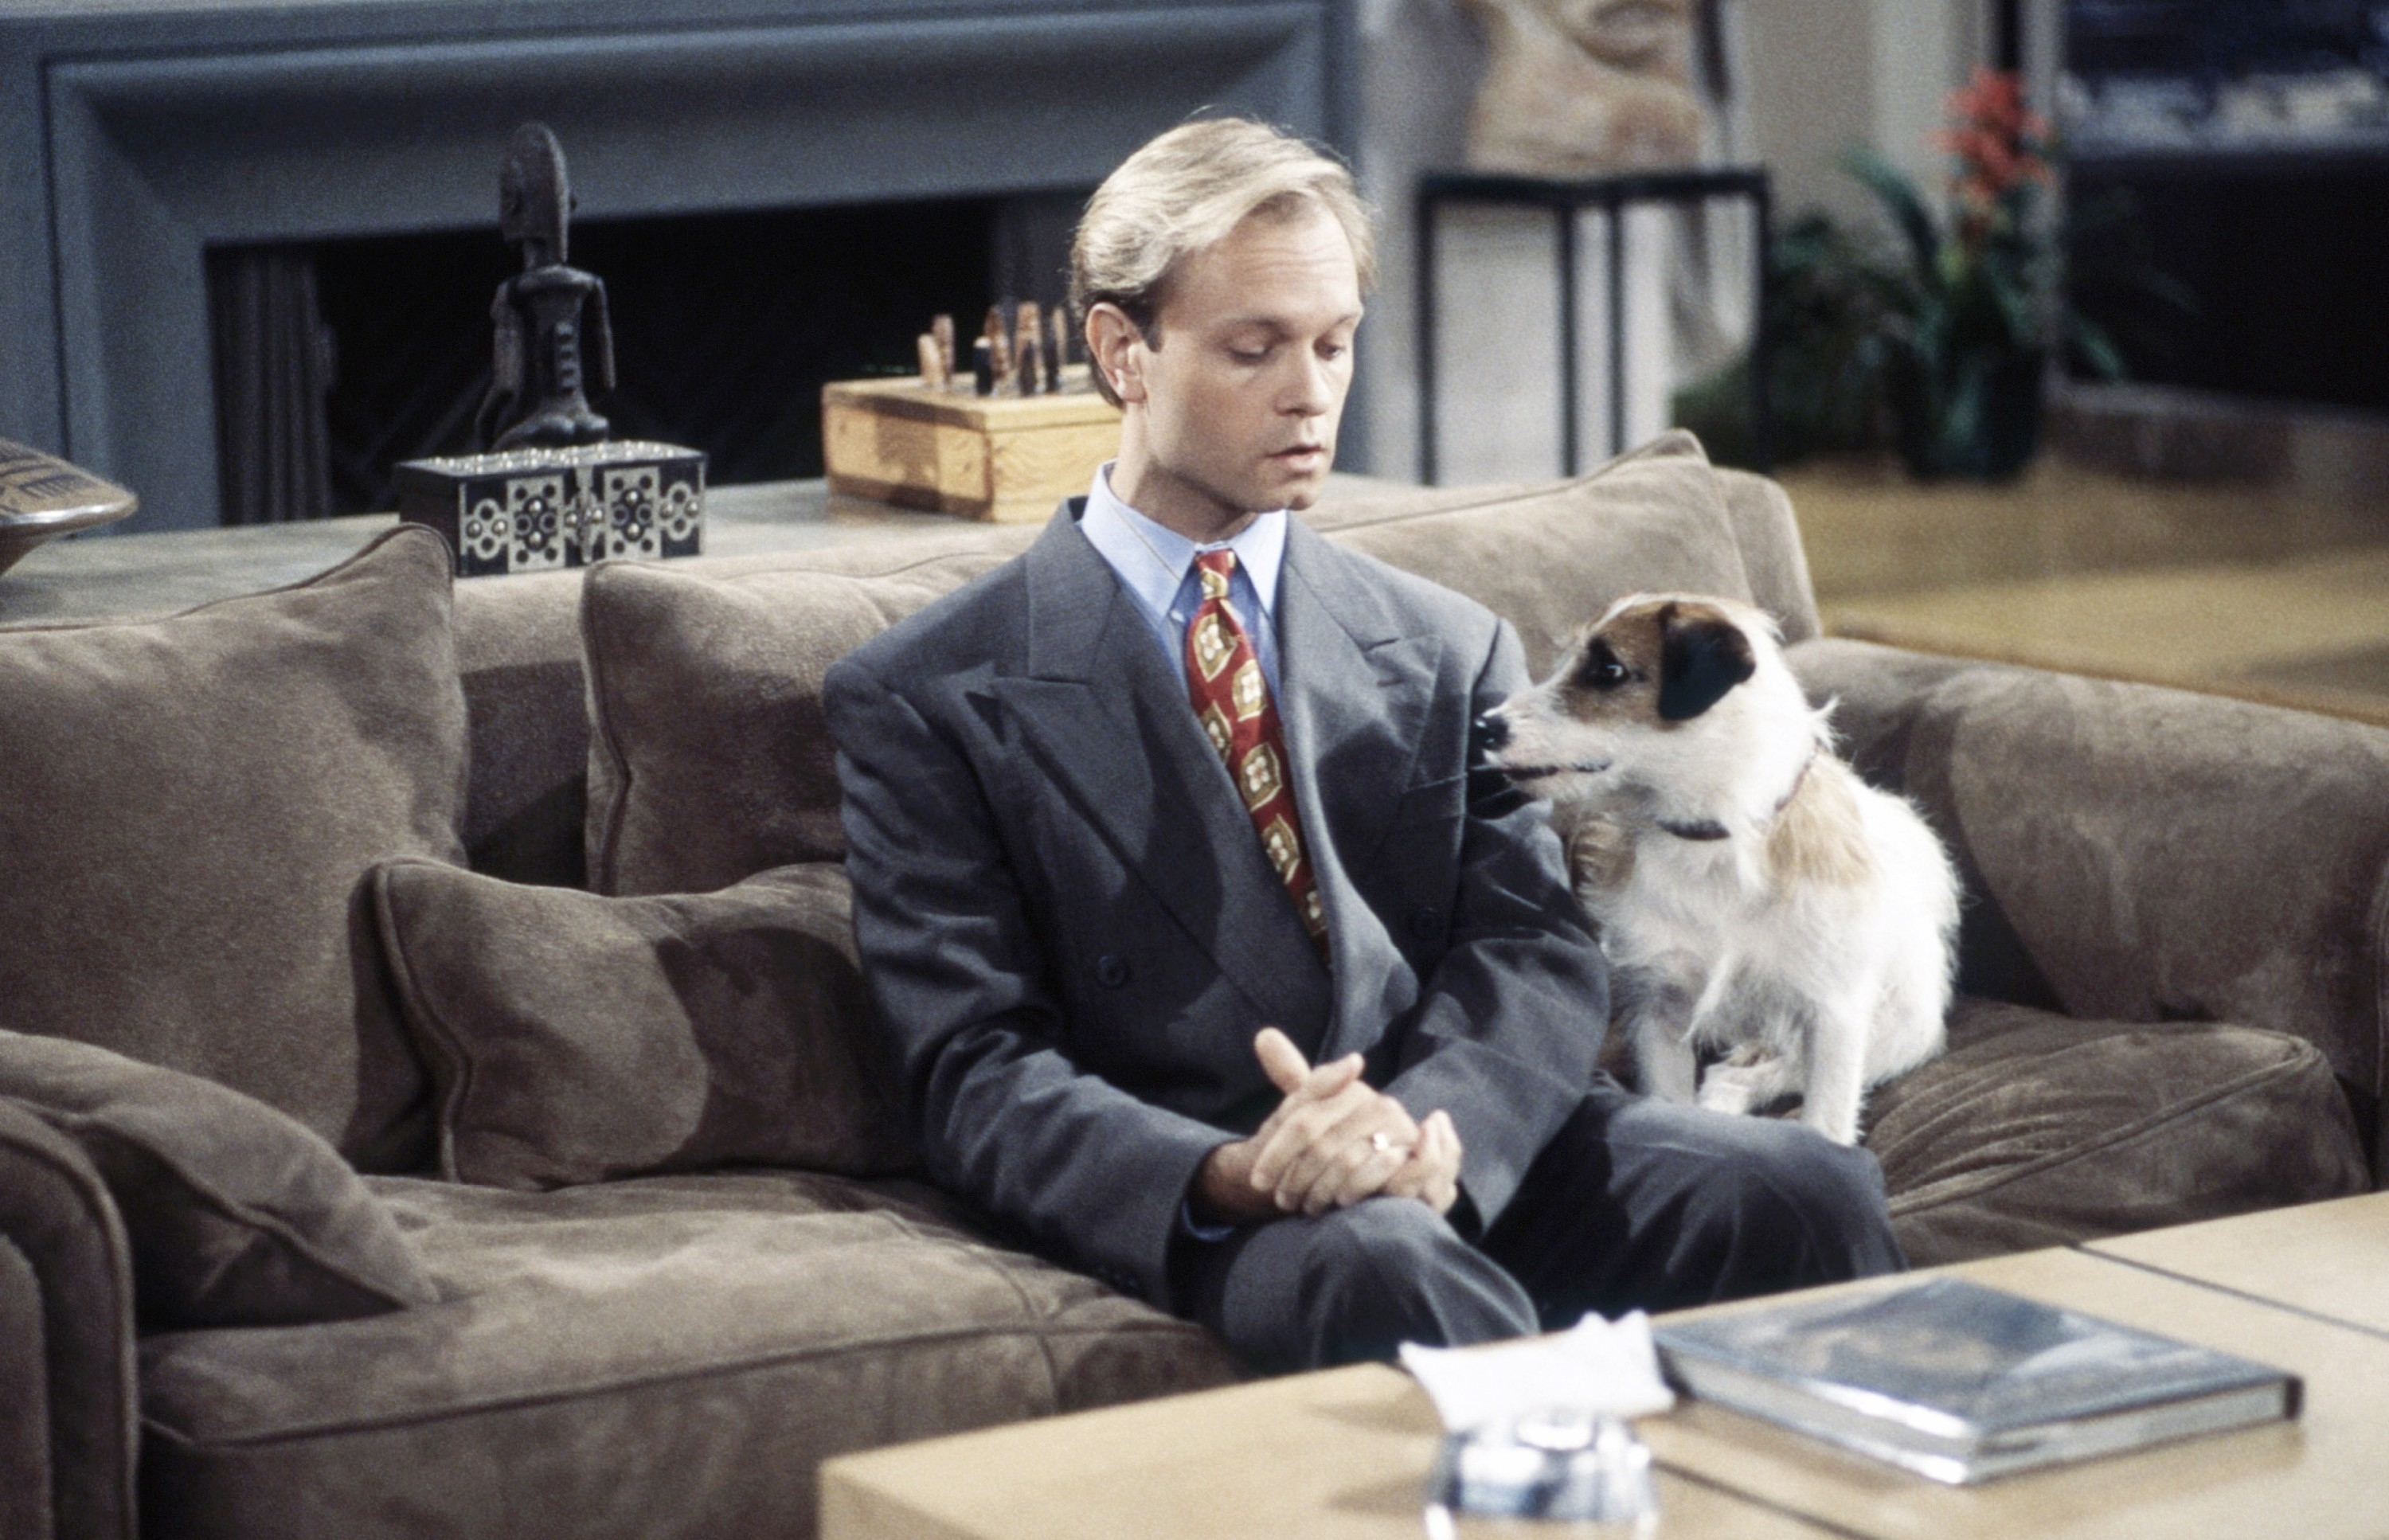 David as Niles Crane sitting on a couch, looking at Eddie the dog